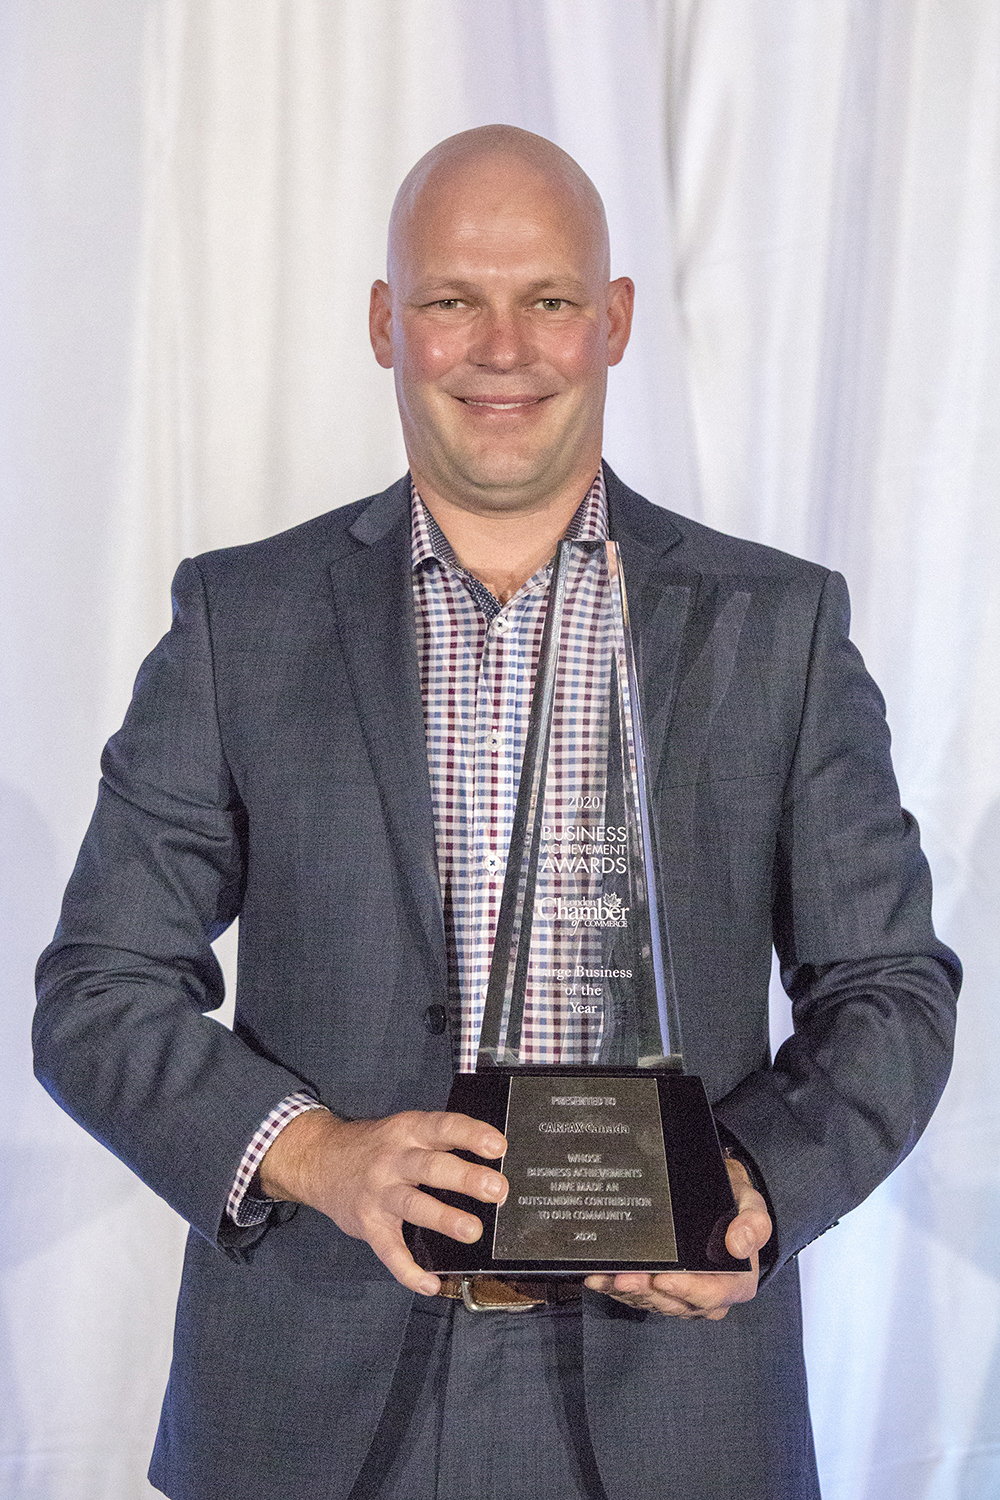 Shawn Vording, VP Automotive Sales, accepting the award on behalf of CARFAX